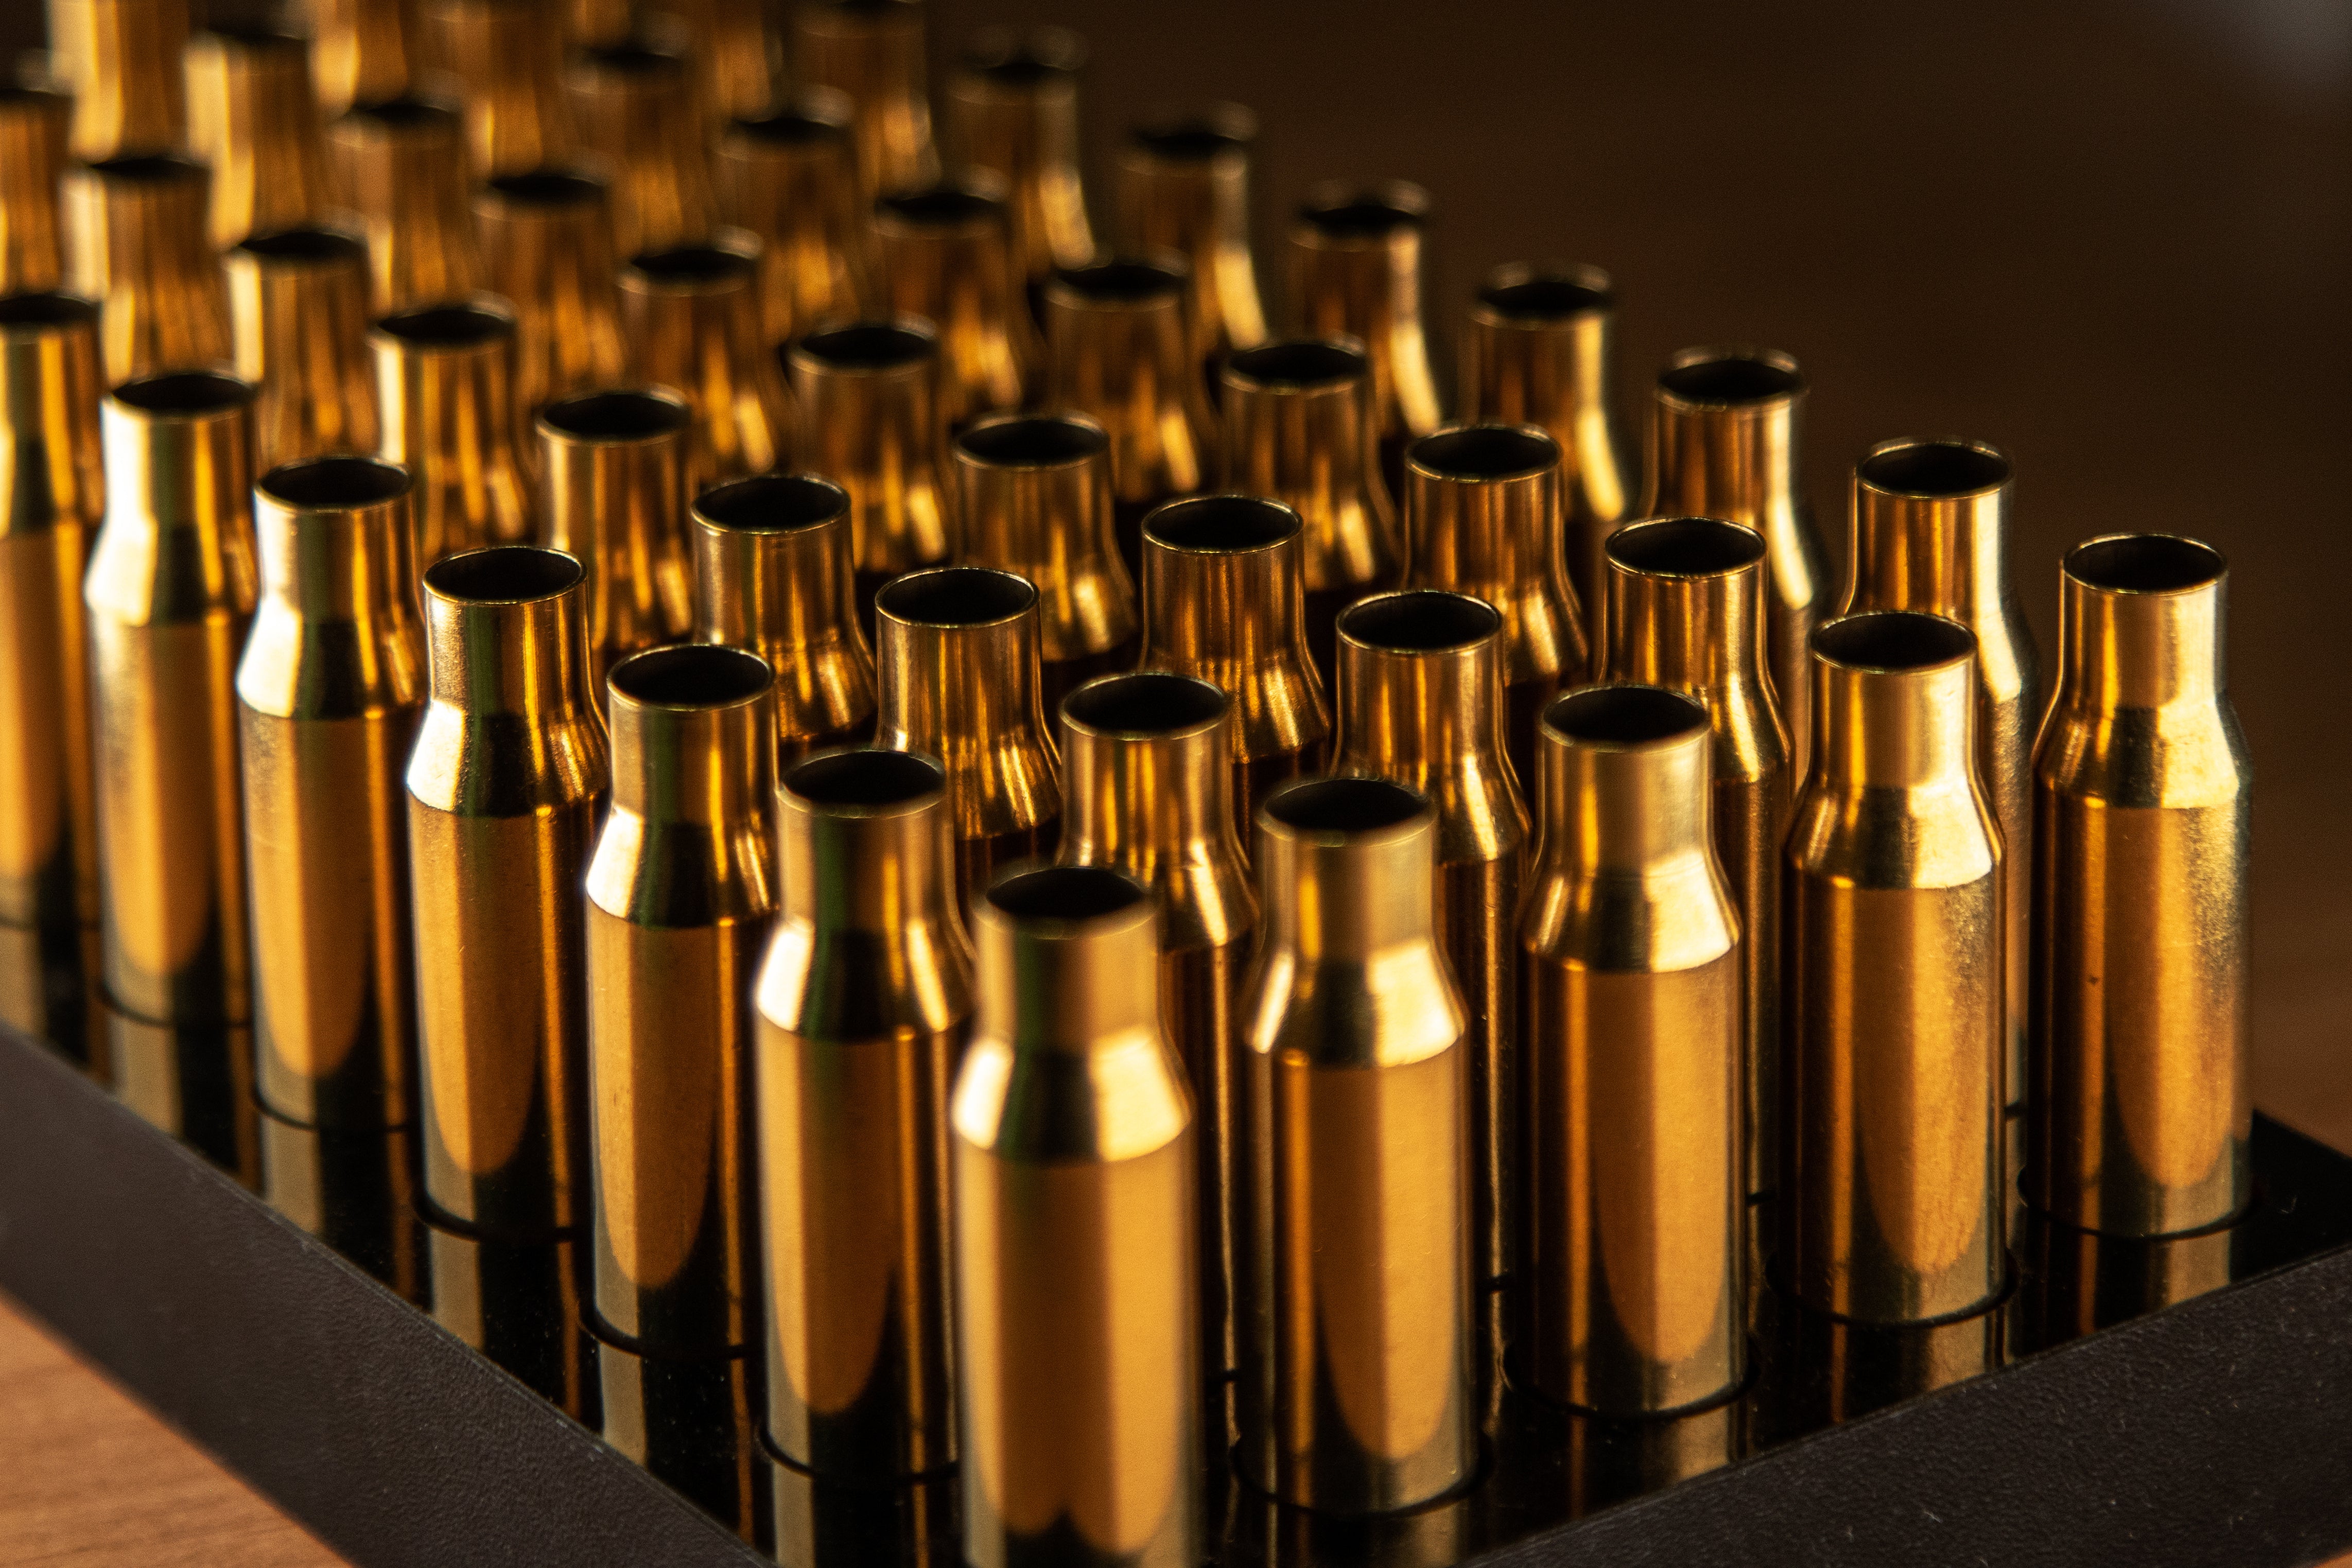 380 Auto - 1000ct used reloading brass bullets